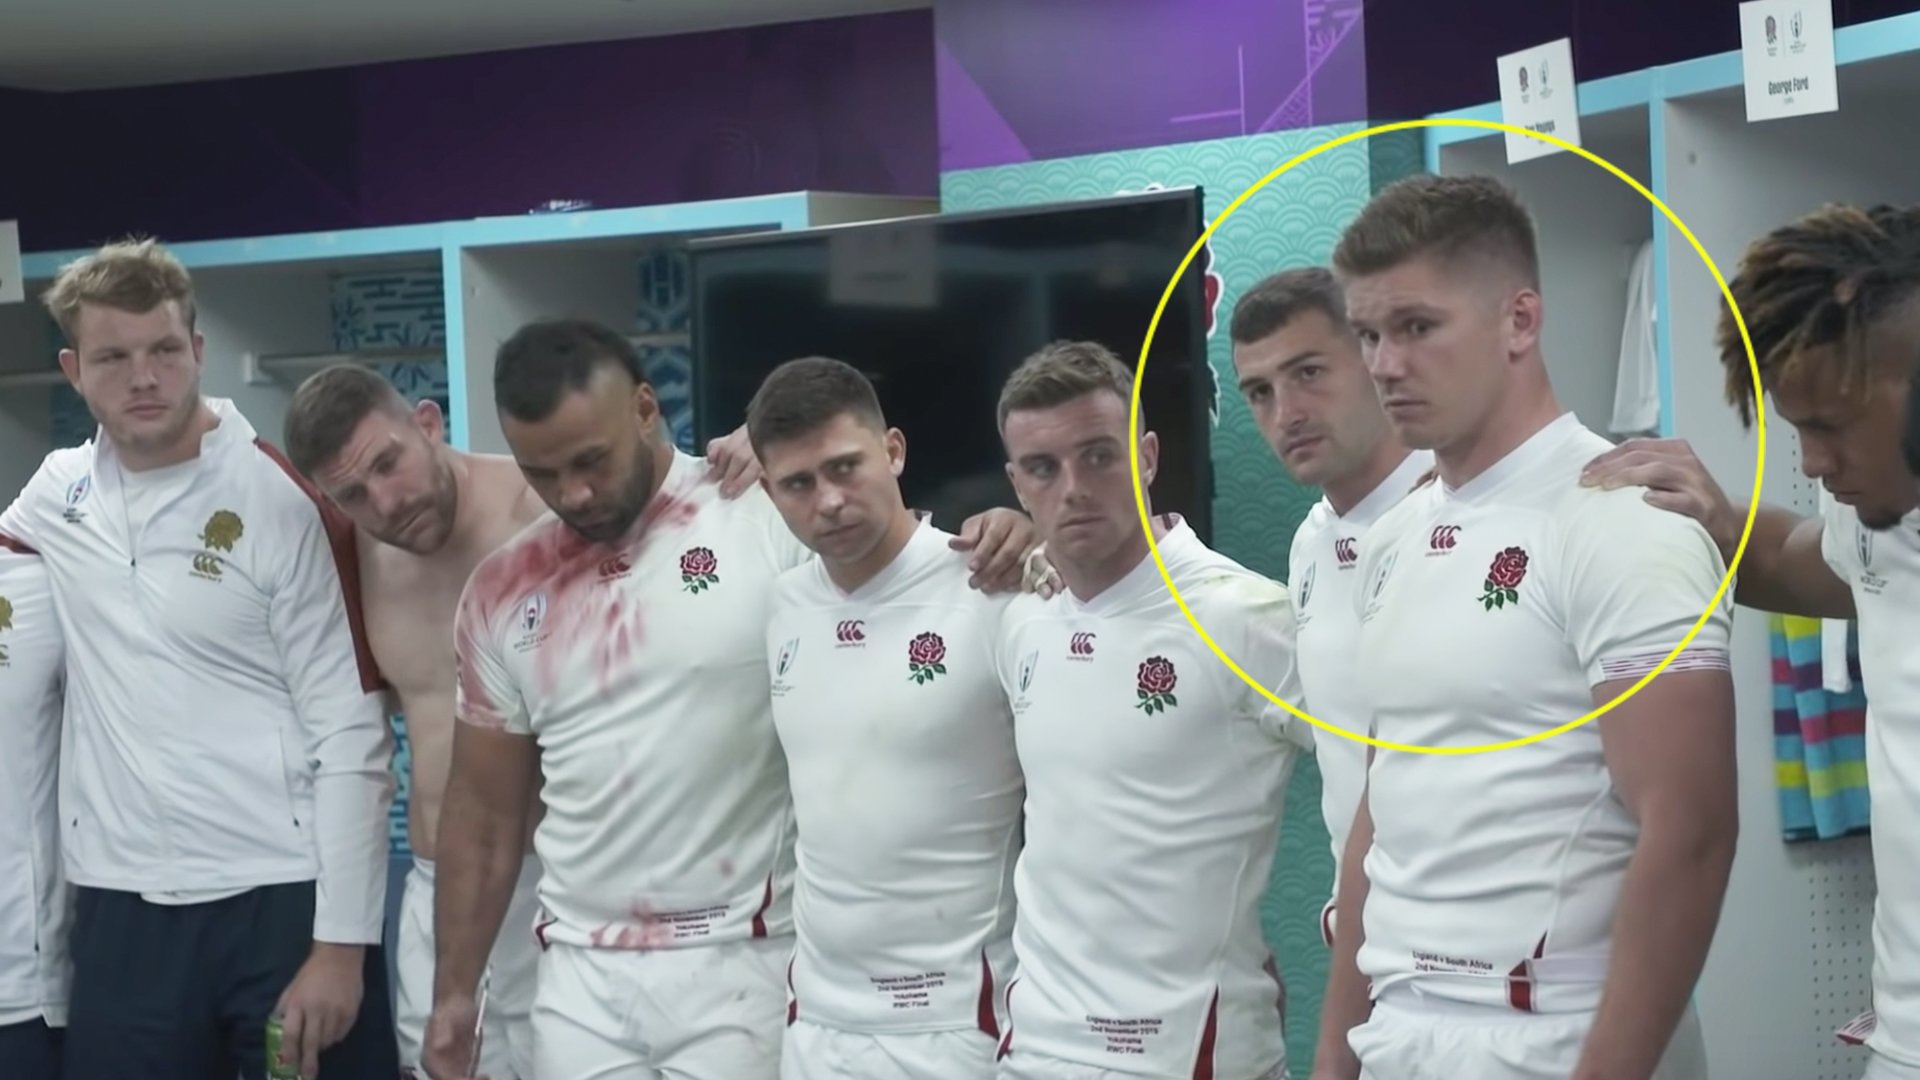 The horrendous atmosphere in the England changing room after their World Cup final loss